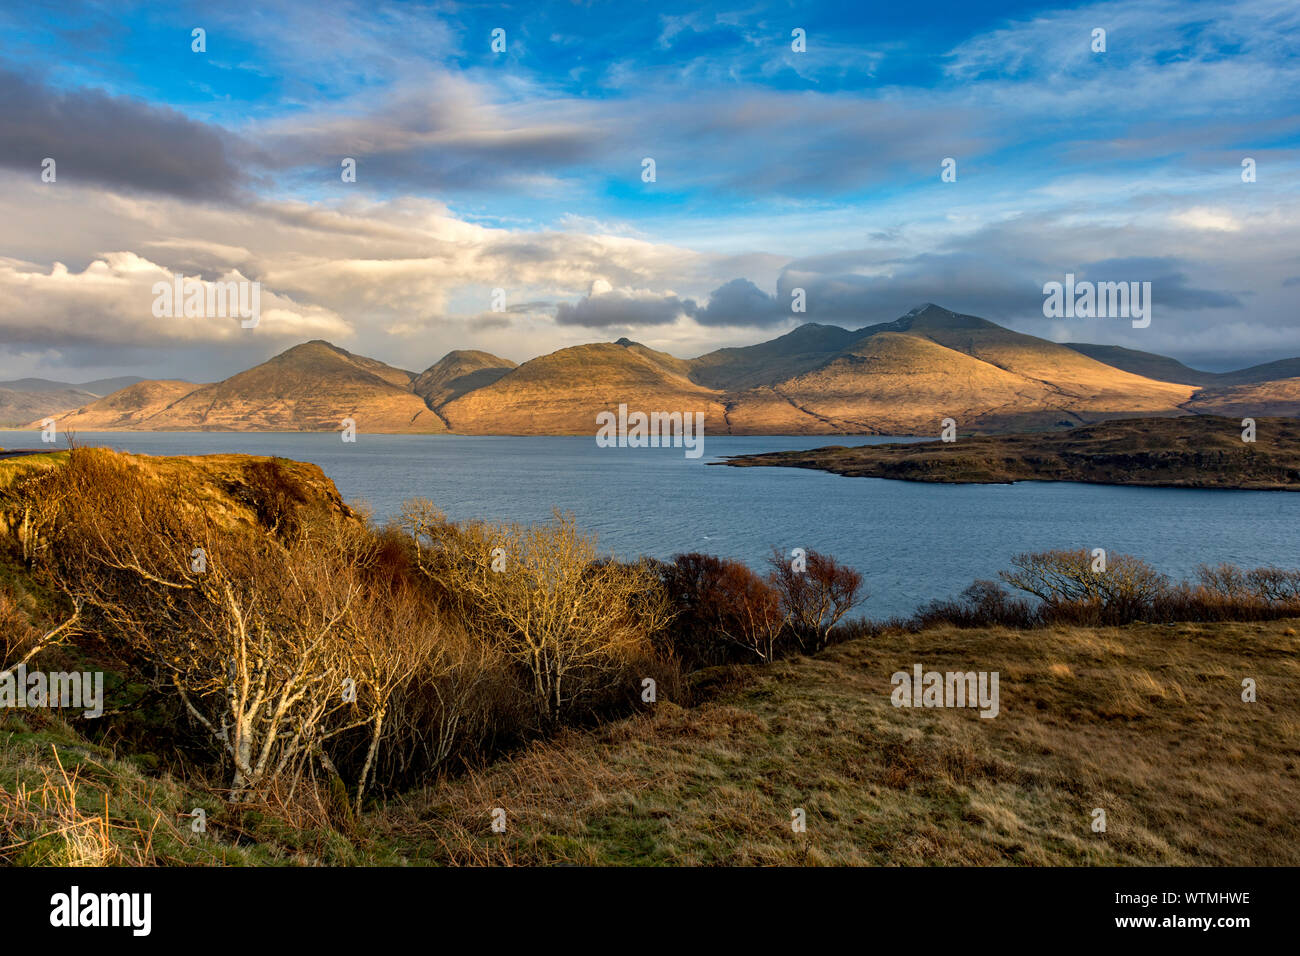 Sunset on the Ben More hills, over the island of Eorsa and Loch na Keal, Isle of Mull, Scotland, UK Stock Photo